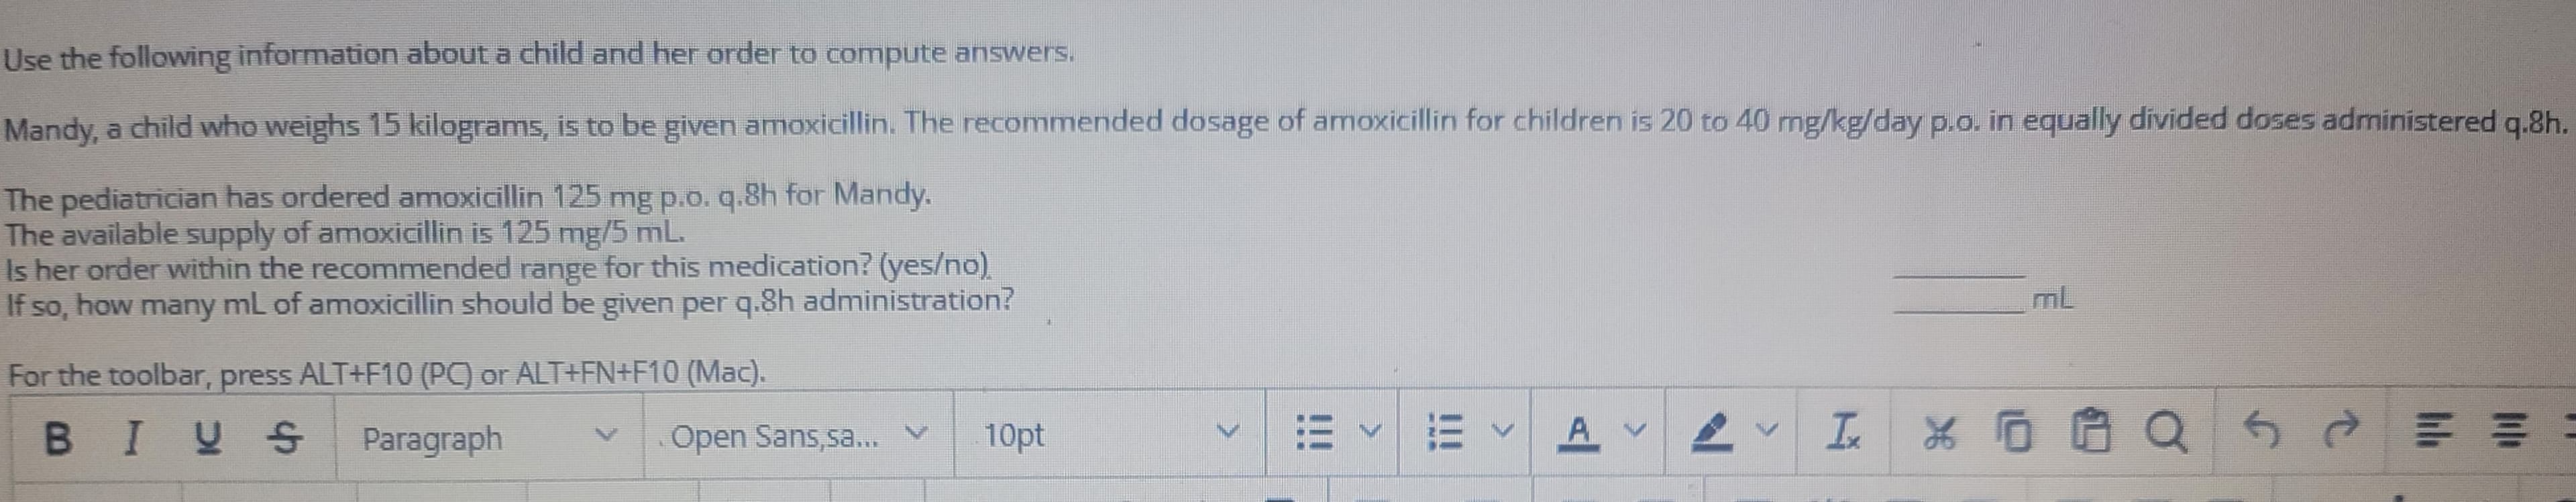 Use the following information about a child and her order to compute answers.
Mandy, a child who weighs 15 kilograms, is to be given amoxicillin. The recommended dosage of amoxicillin for children is 20 to 40 mg/kg/day p.o. in equally divided doses administered q.8h.
The pediatrician has ordered amoxicillin 125 mg p.o. q.8h for Mandy.
The available supply of amoxicillin is 125 mg/5 mL.
Is her order within the recommended range for this medication? (yes/no)
If so, how many mL of amoxicillin should be given per q.8h administration?
For the toolbar, press ALT+F10 (PC) or ALT+FN+F10 (Mac).
BIUS Paragraph
Open Sans,sa... V 10pt
EEA
I
хоро
55